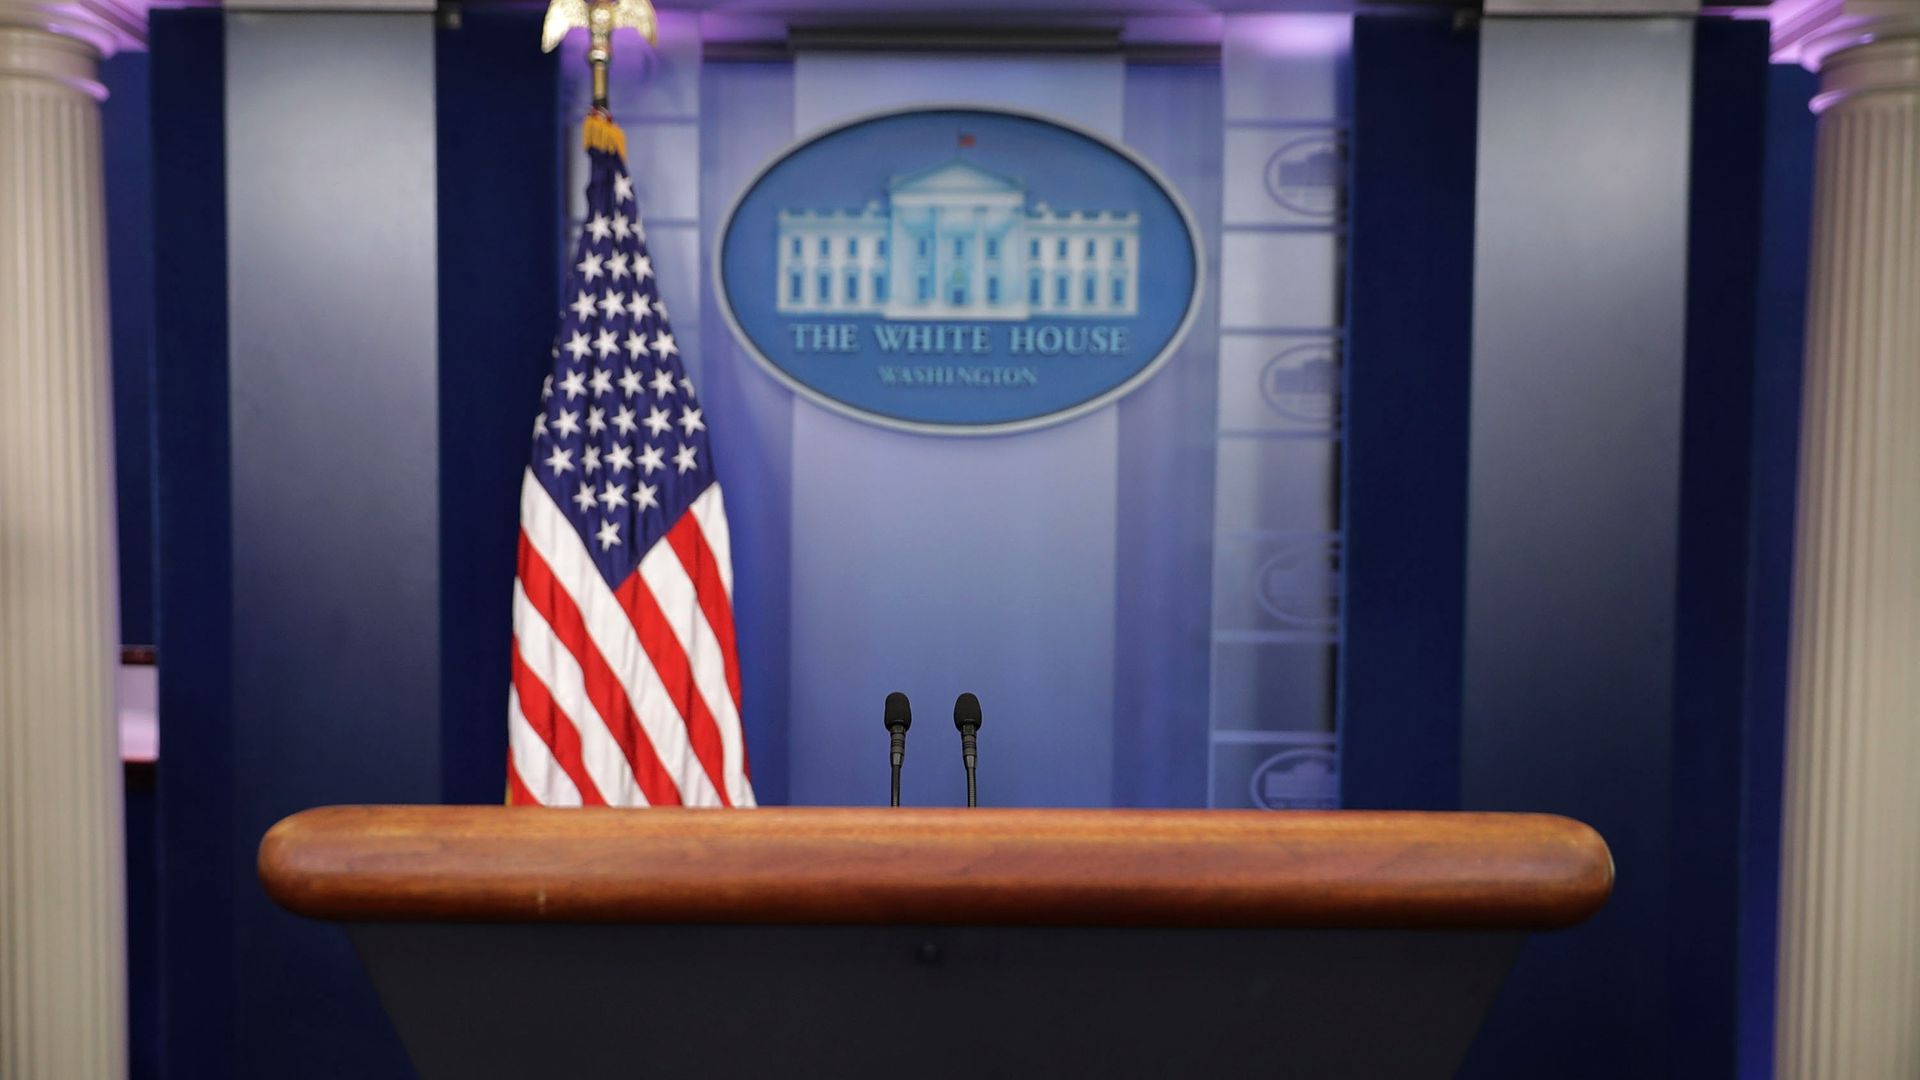 It's been a year since the last daily White House press briefing